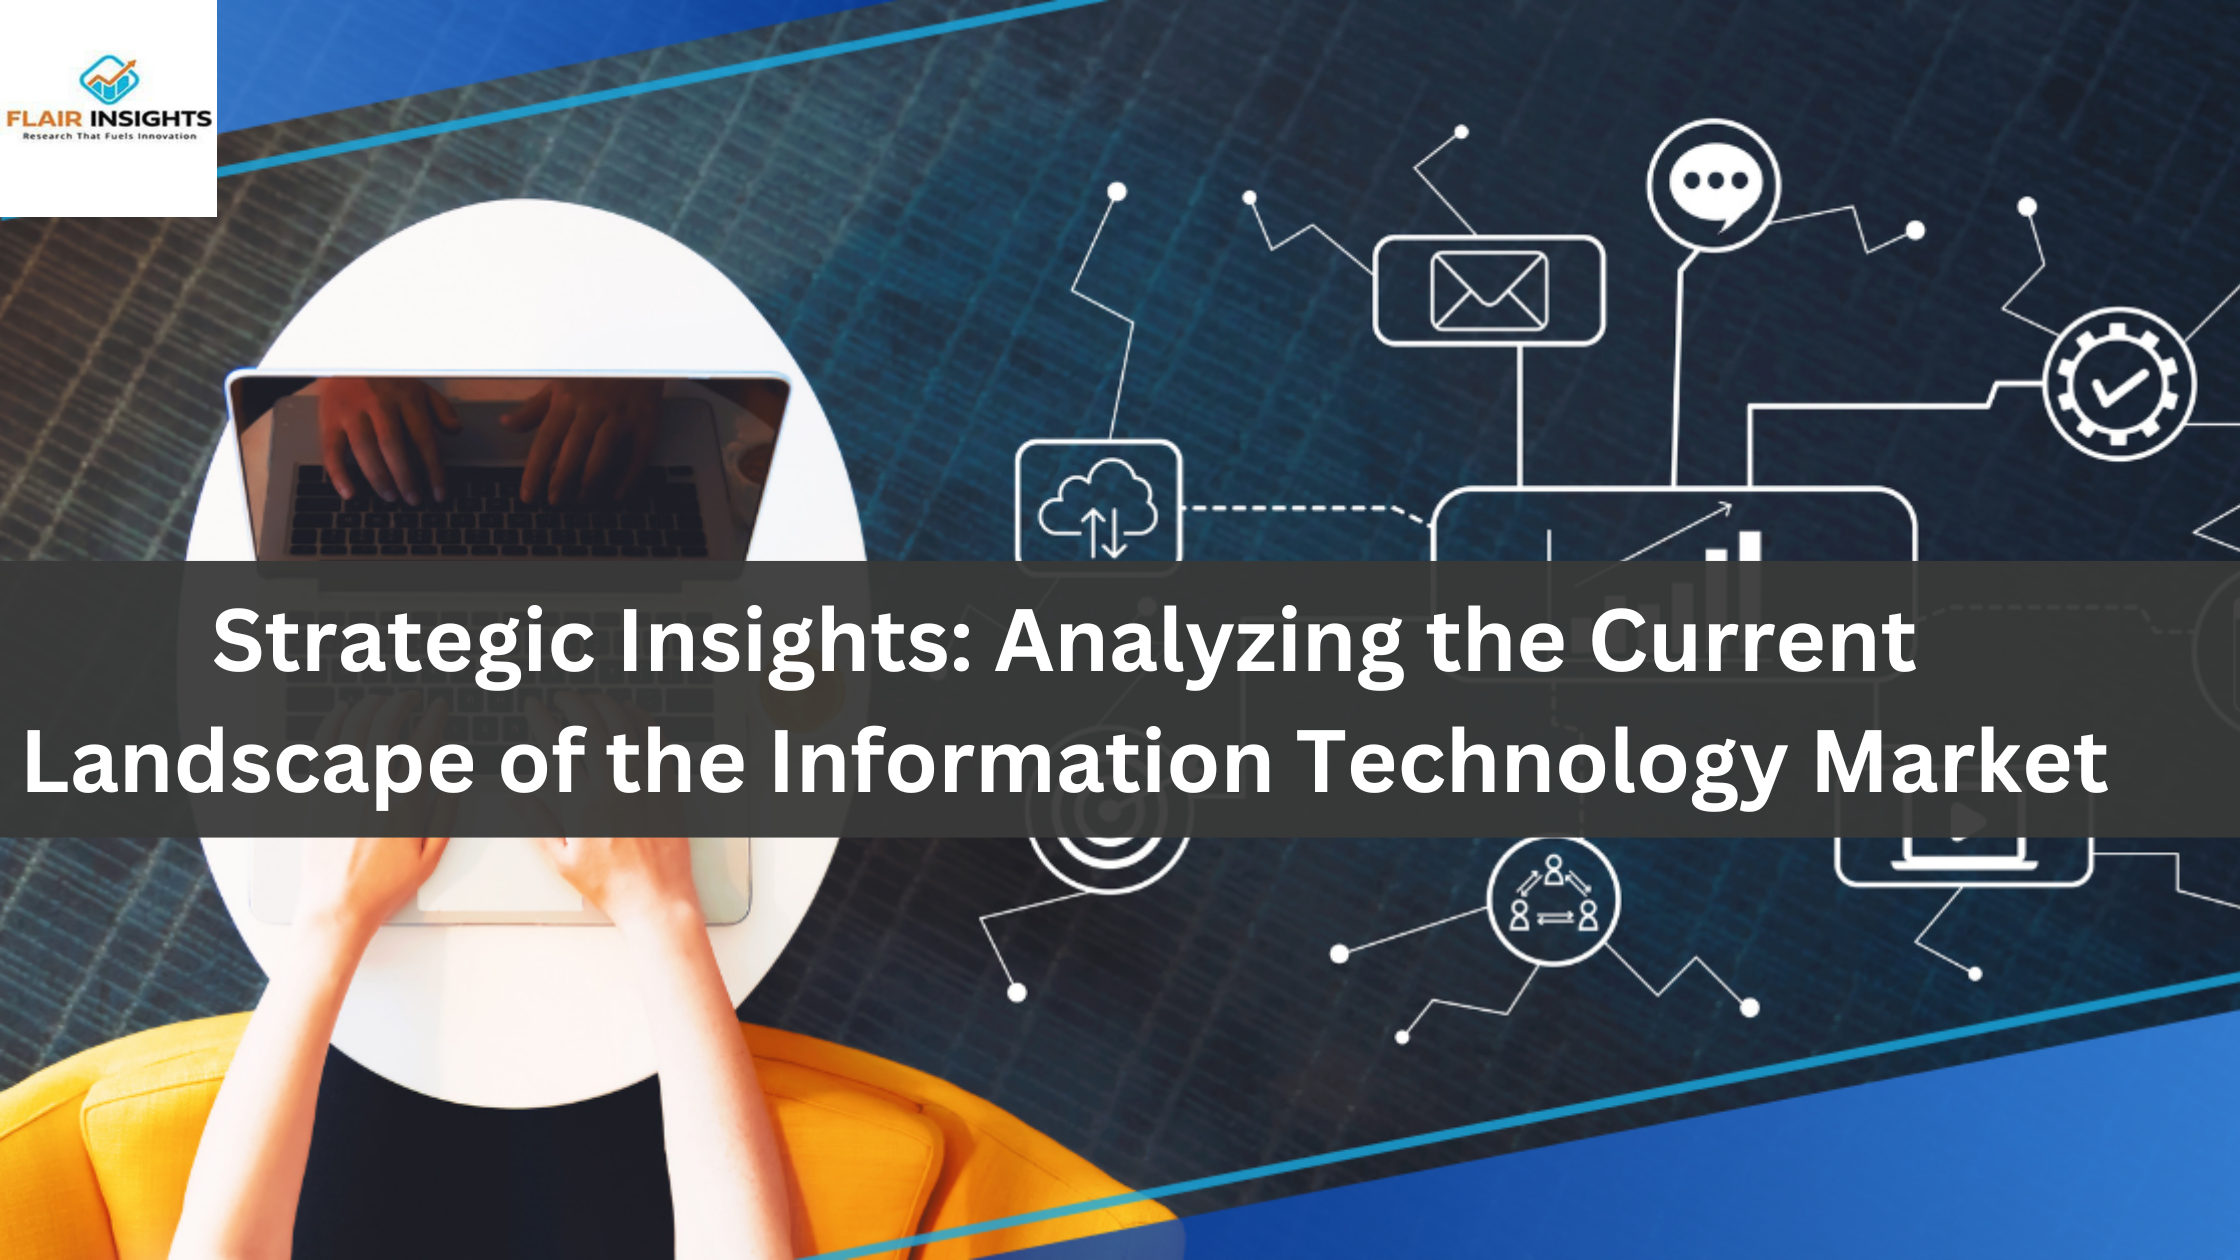 Strategic Insights: Analyzing the Current Landscape of the Information Technology Market